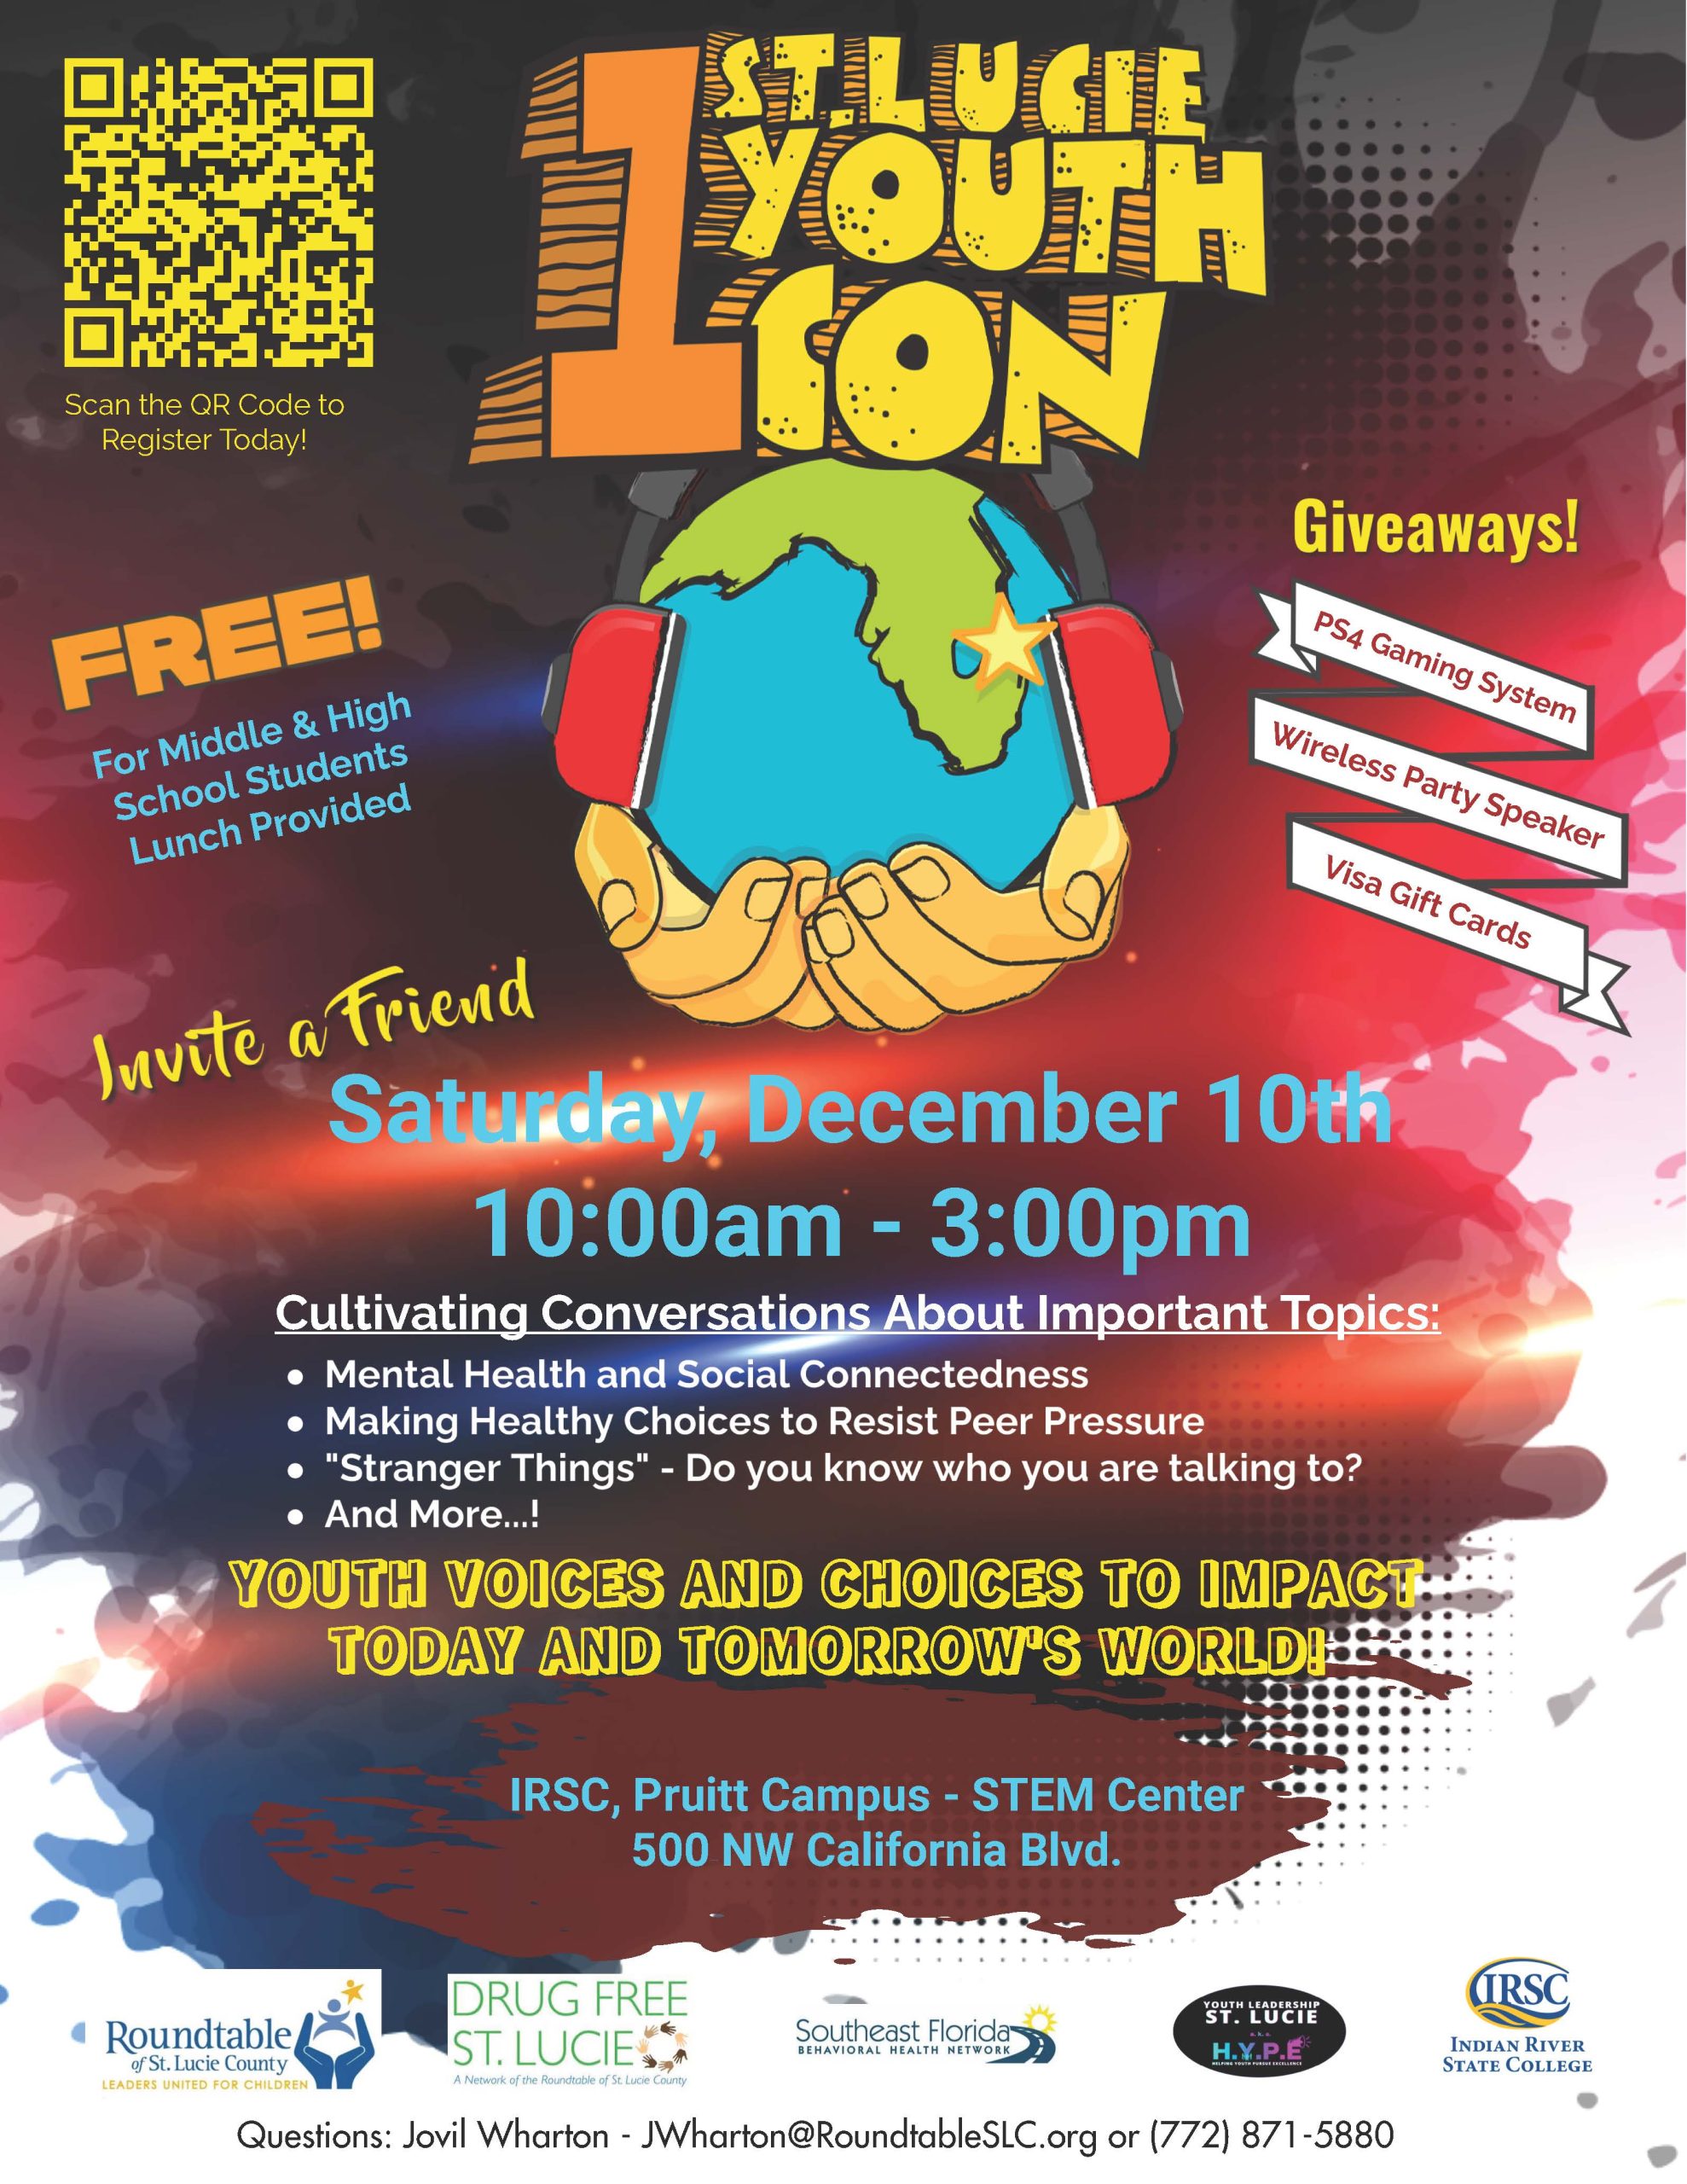 Flyer depicting a free event for middle and high school students with lunch provided at IRSC Pruitt Campus STEM Center 500 NW California Boulevard called One Saint Lucie Con